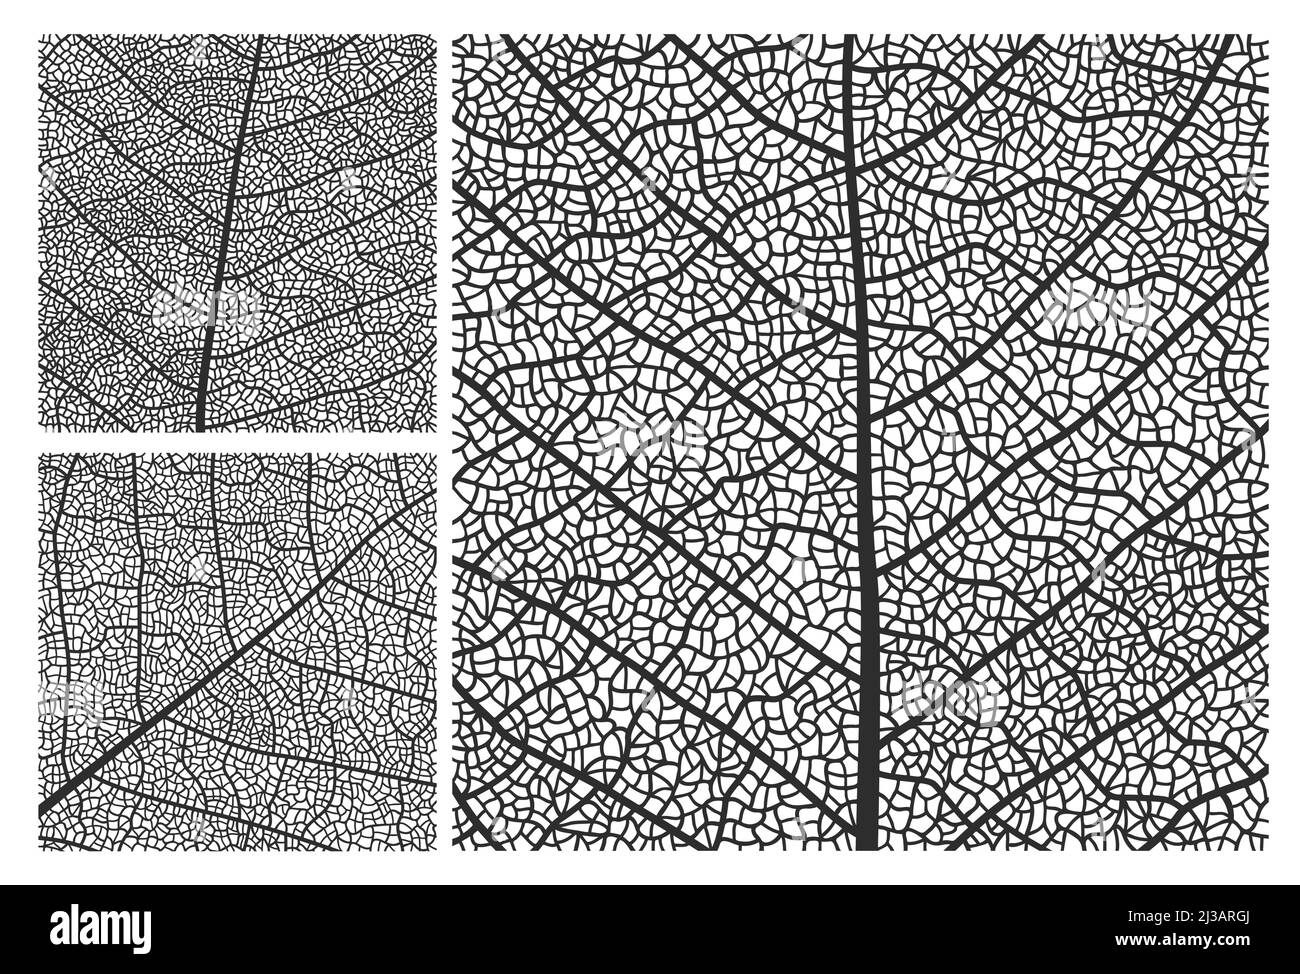 Leaf texture pattern background with veins and cells. Vector closeup plant leaf pattern set with monochrome ornaments of maple, birch or walnut tree leaves mosaic structure, nature abstract backdrop Stock Vector